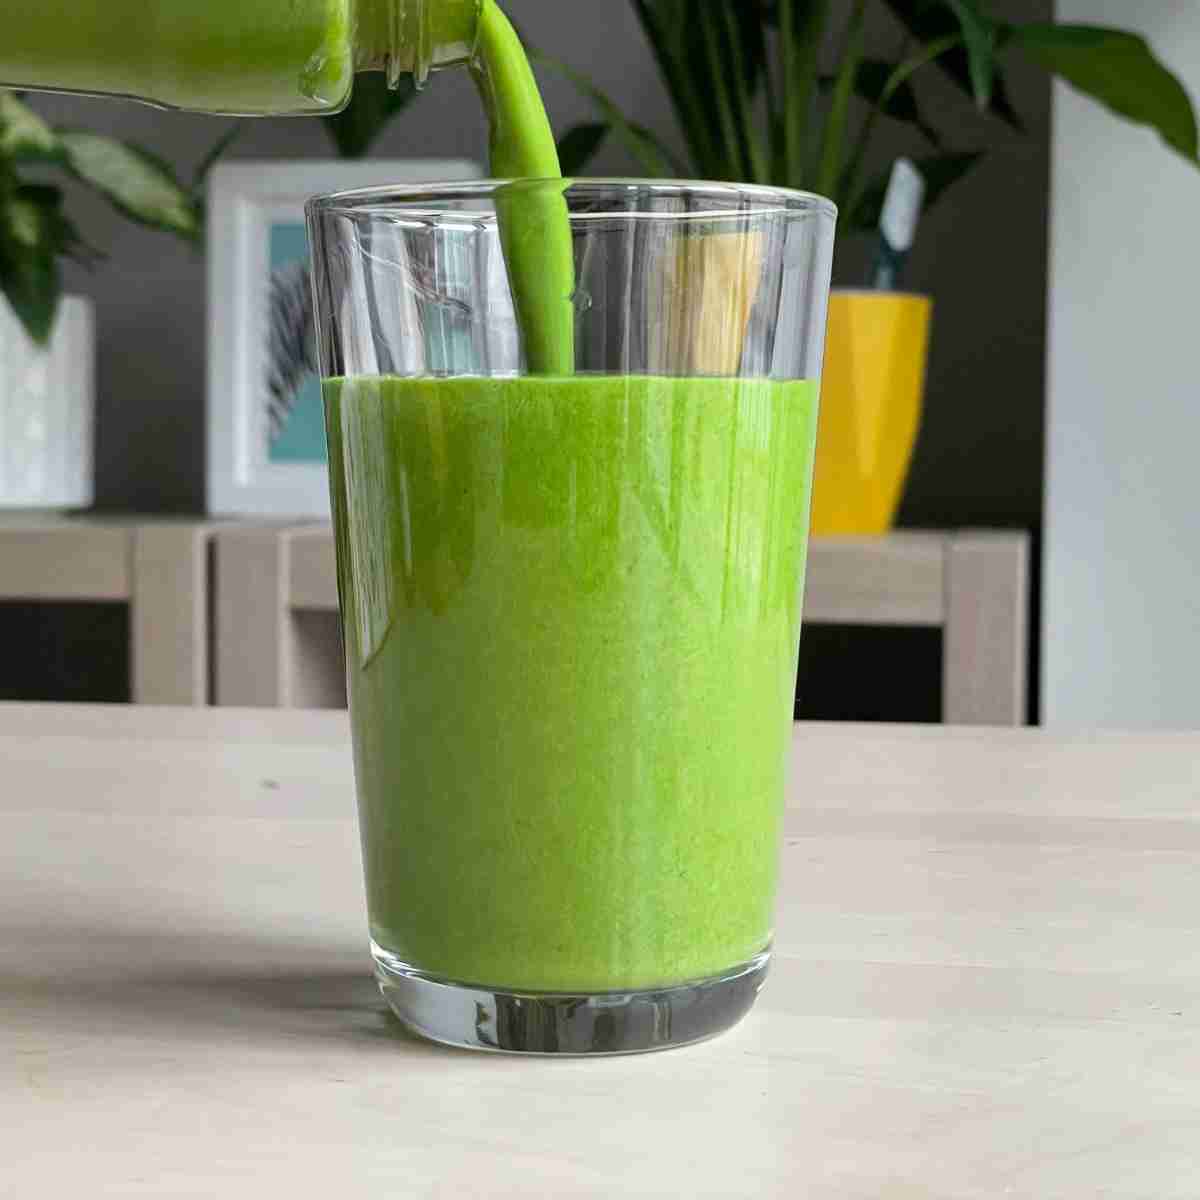 pour sweet matcha smoothie into glass